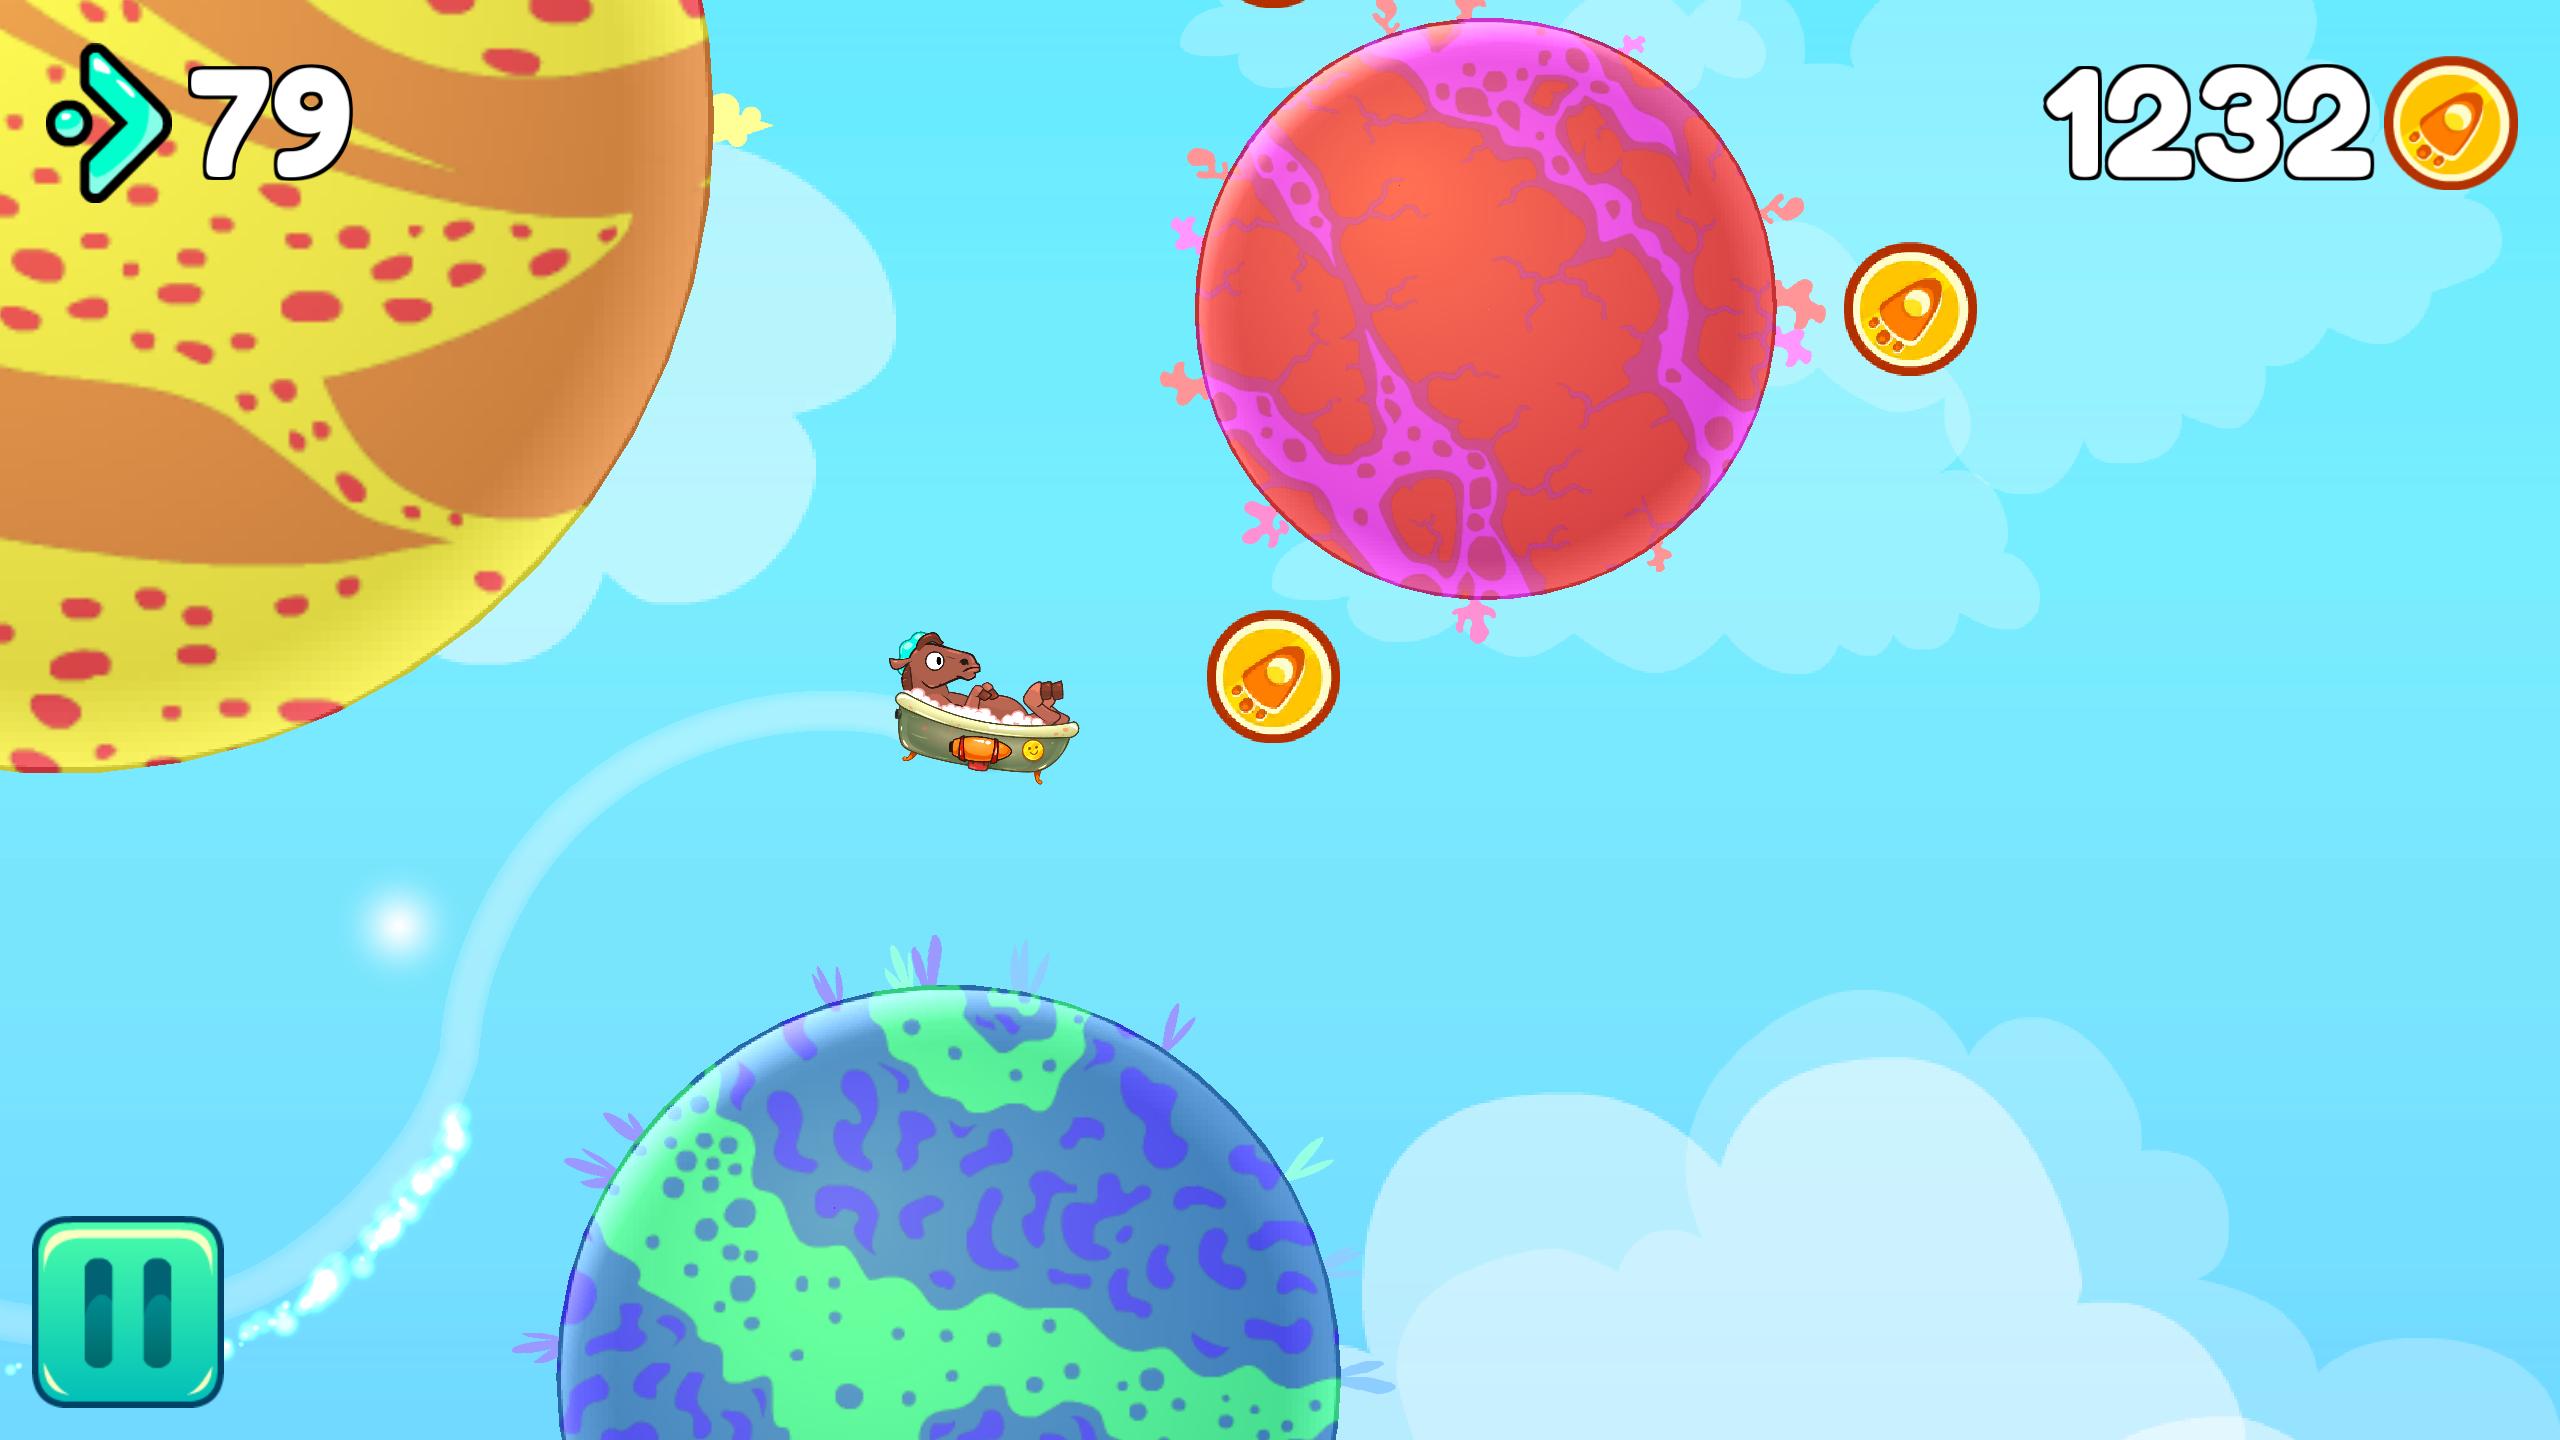 Be a fly game. Игра Fly. Android game Fly. Hi Fly игра. Игры на Fly 131.